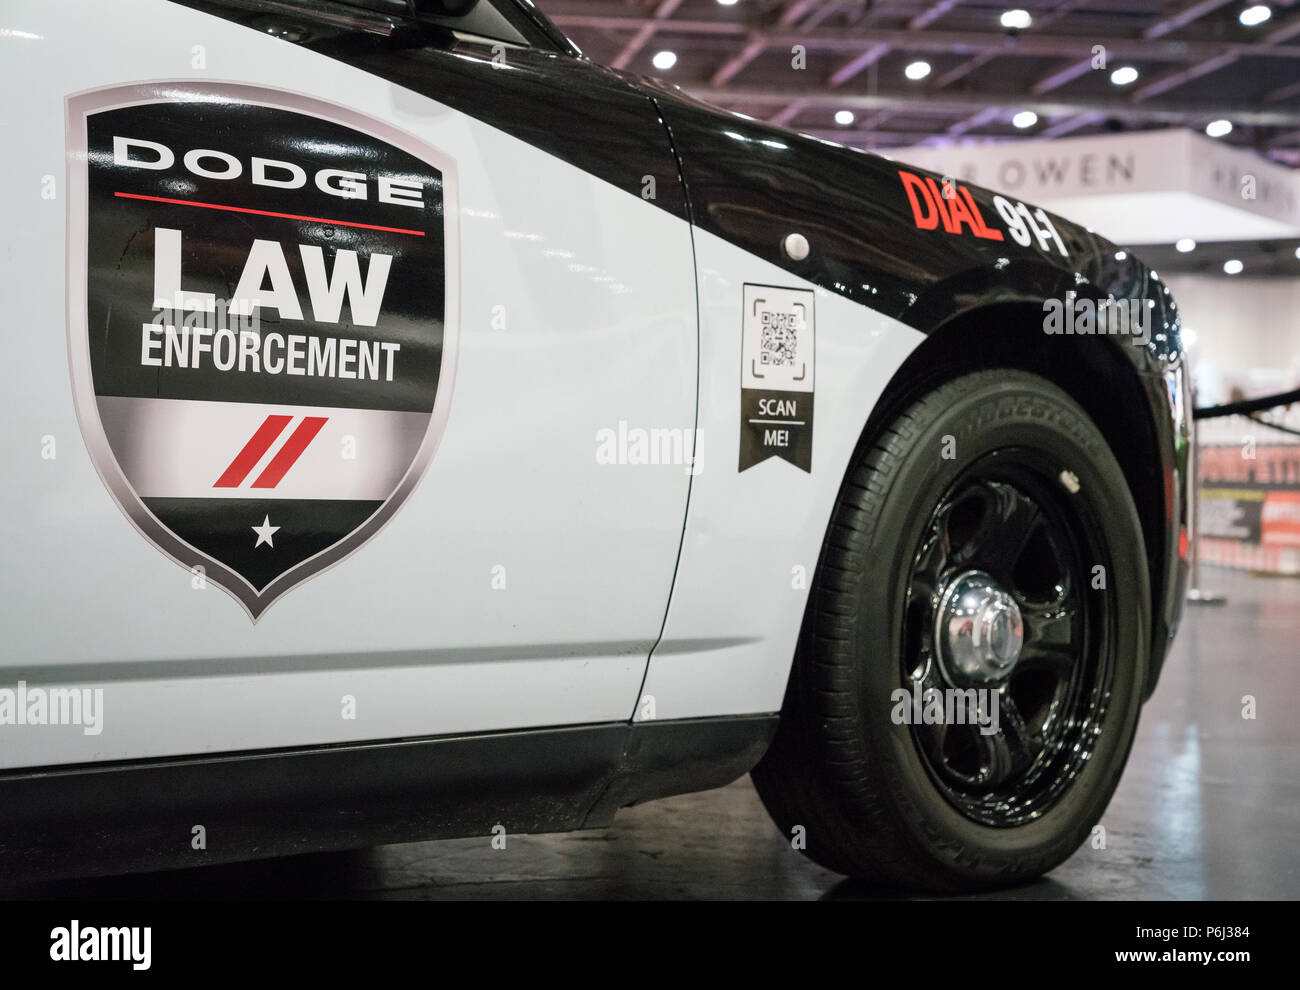 19 May 2018 - London, England. American Muscle car, Dodge Charger SRT police replica in London Motor Show. Stock Photo